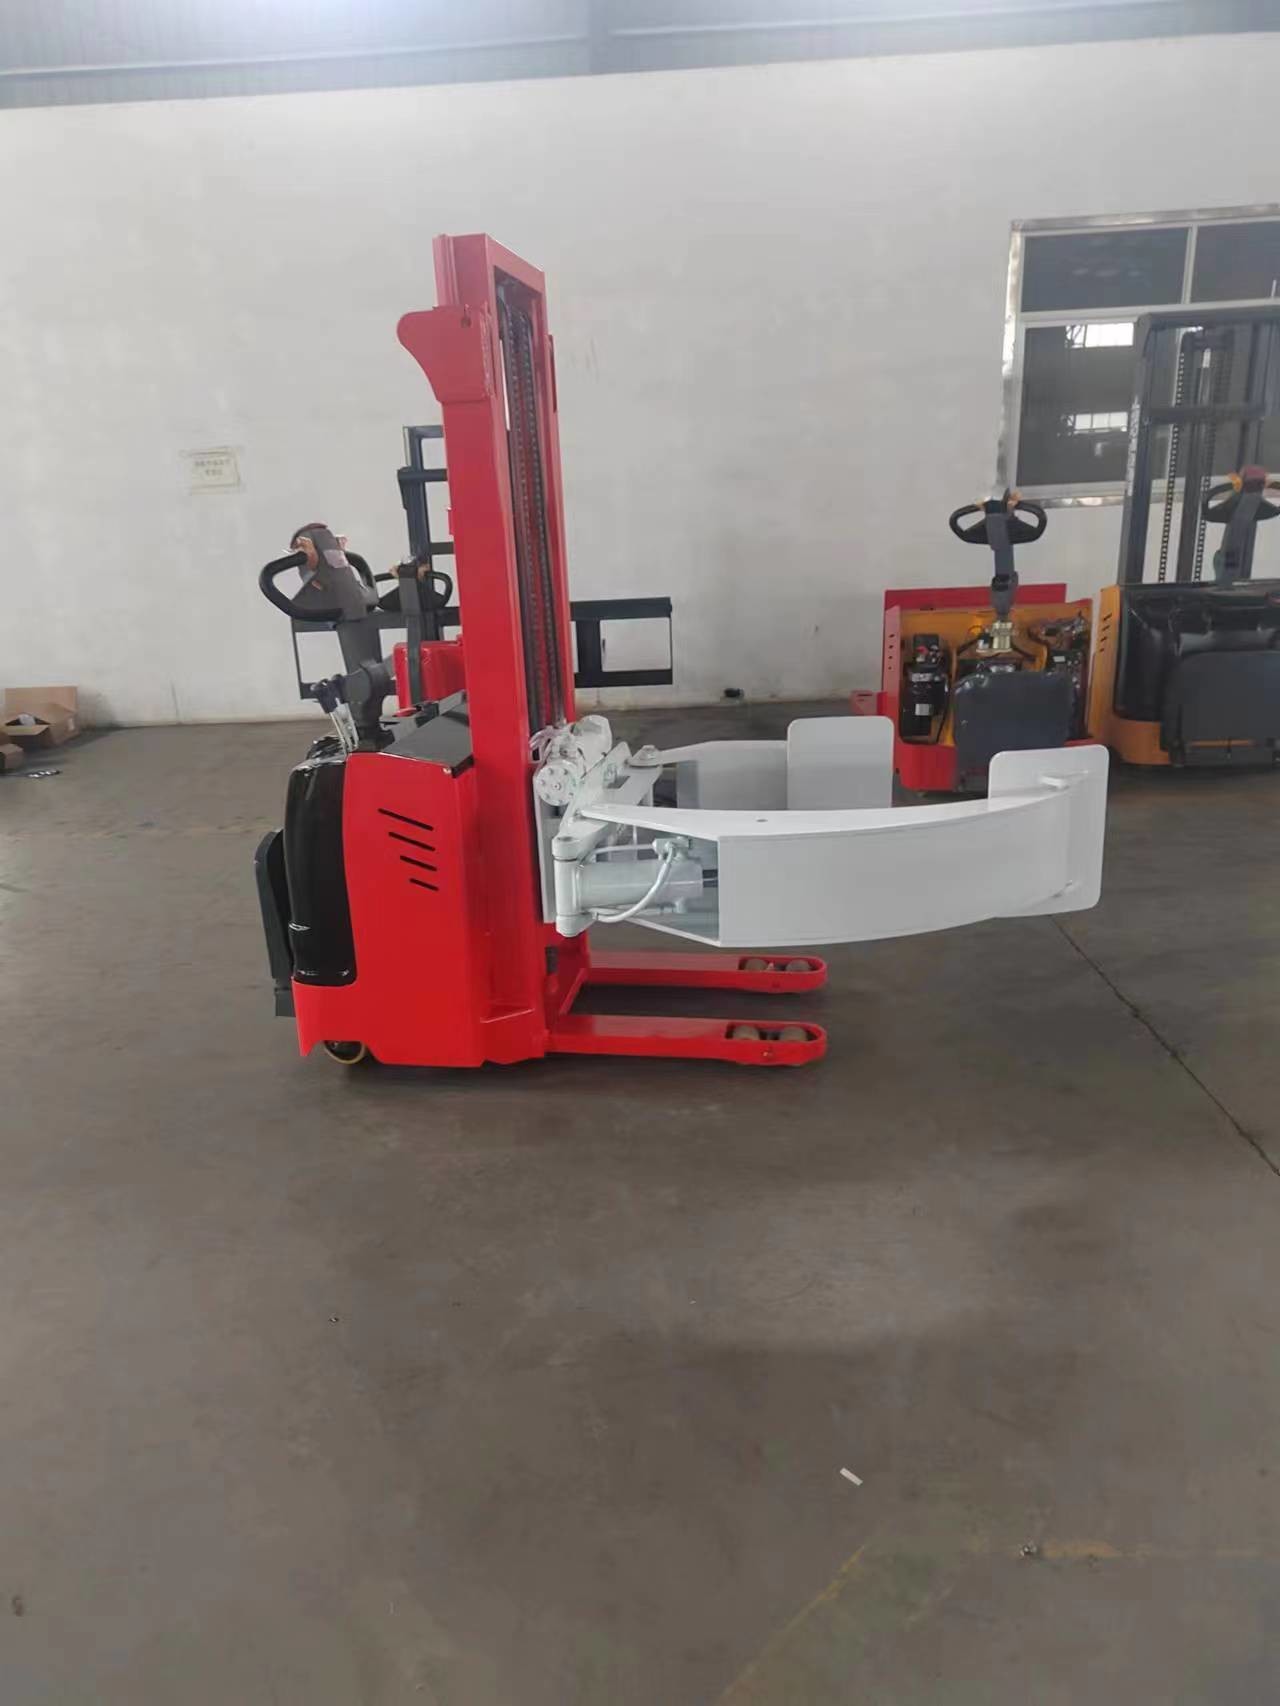 Pu Wheel 500mm Paper Reel Stacker With Paper Roll Clamp